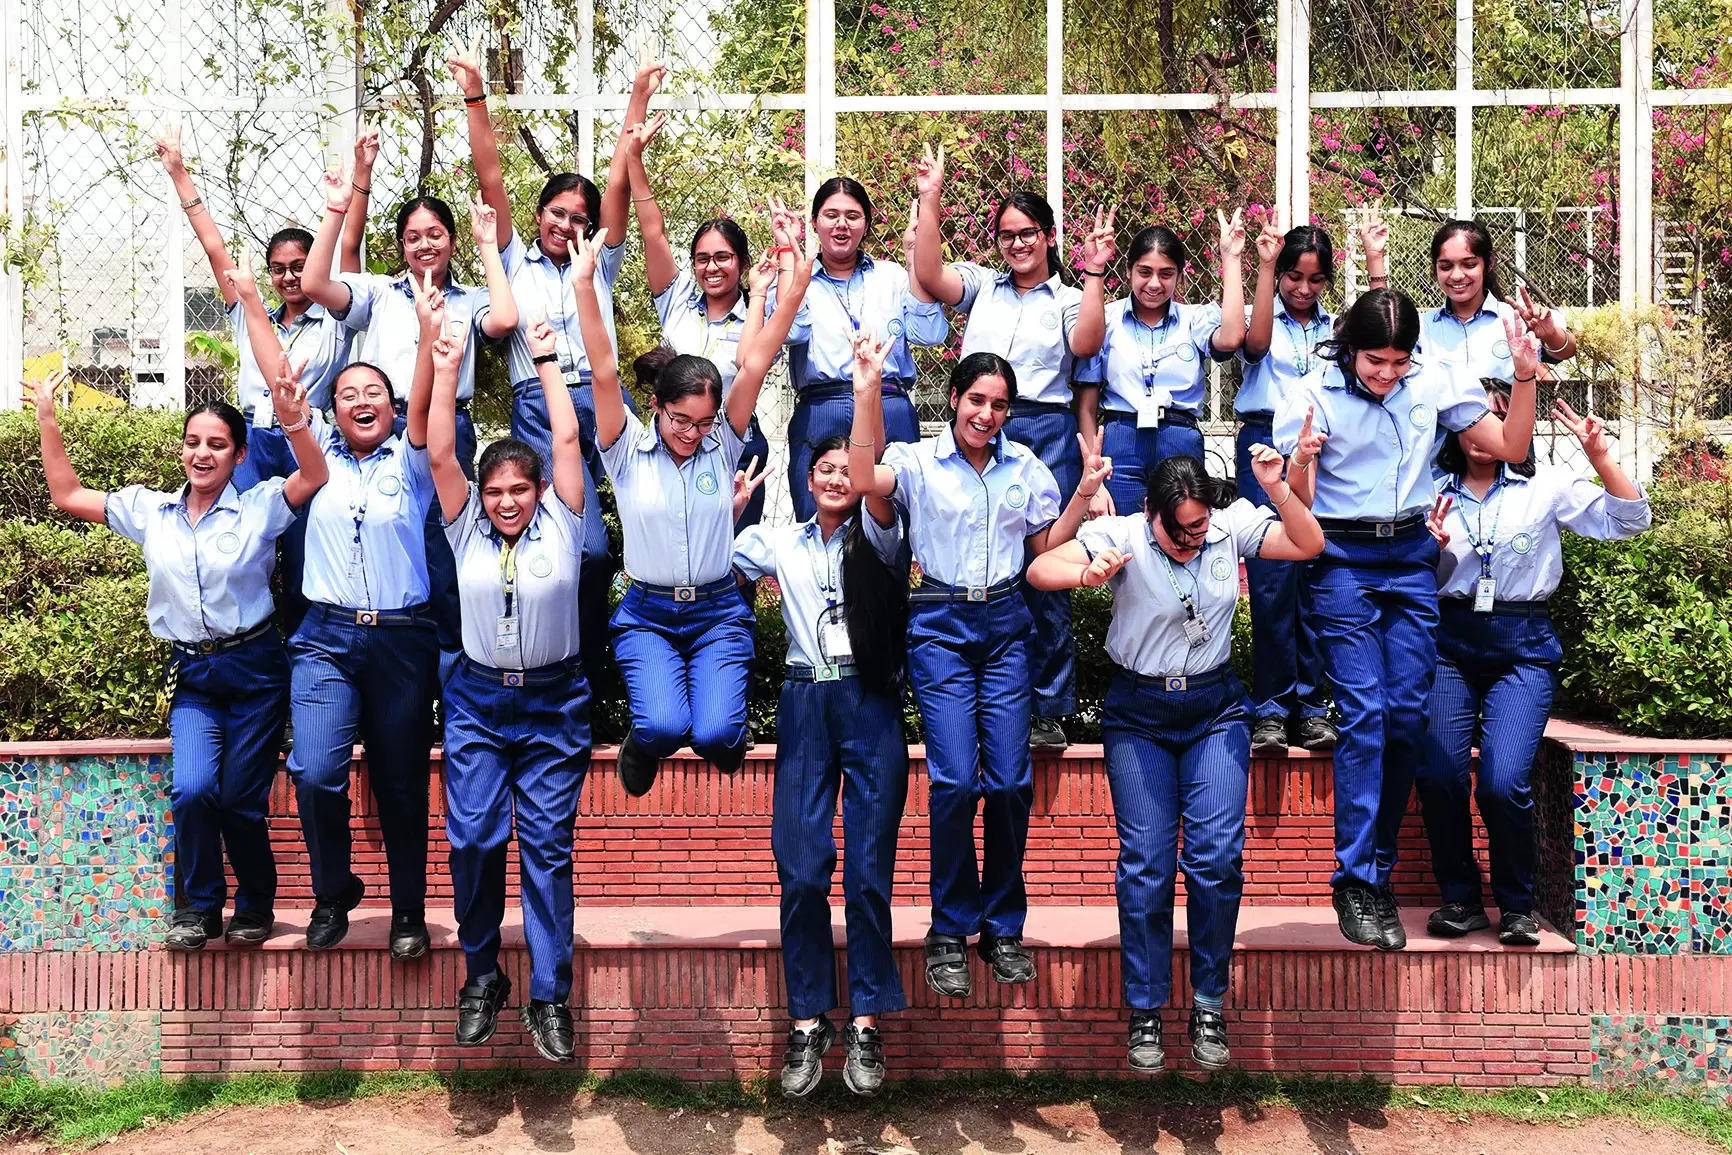 At 90.3%, pass-percentage in Hry goes up for Class XII, barely any change for Class X